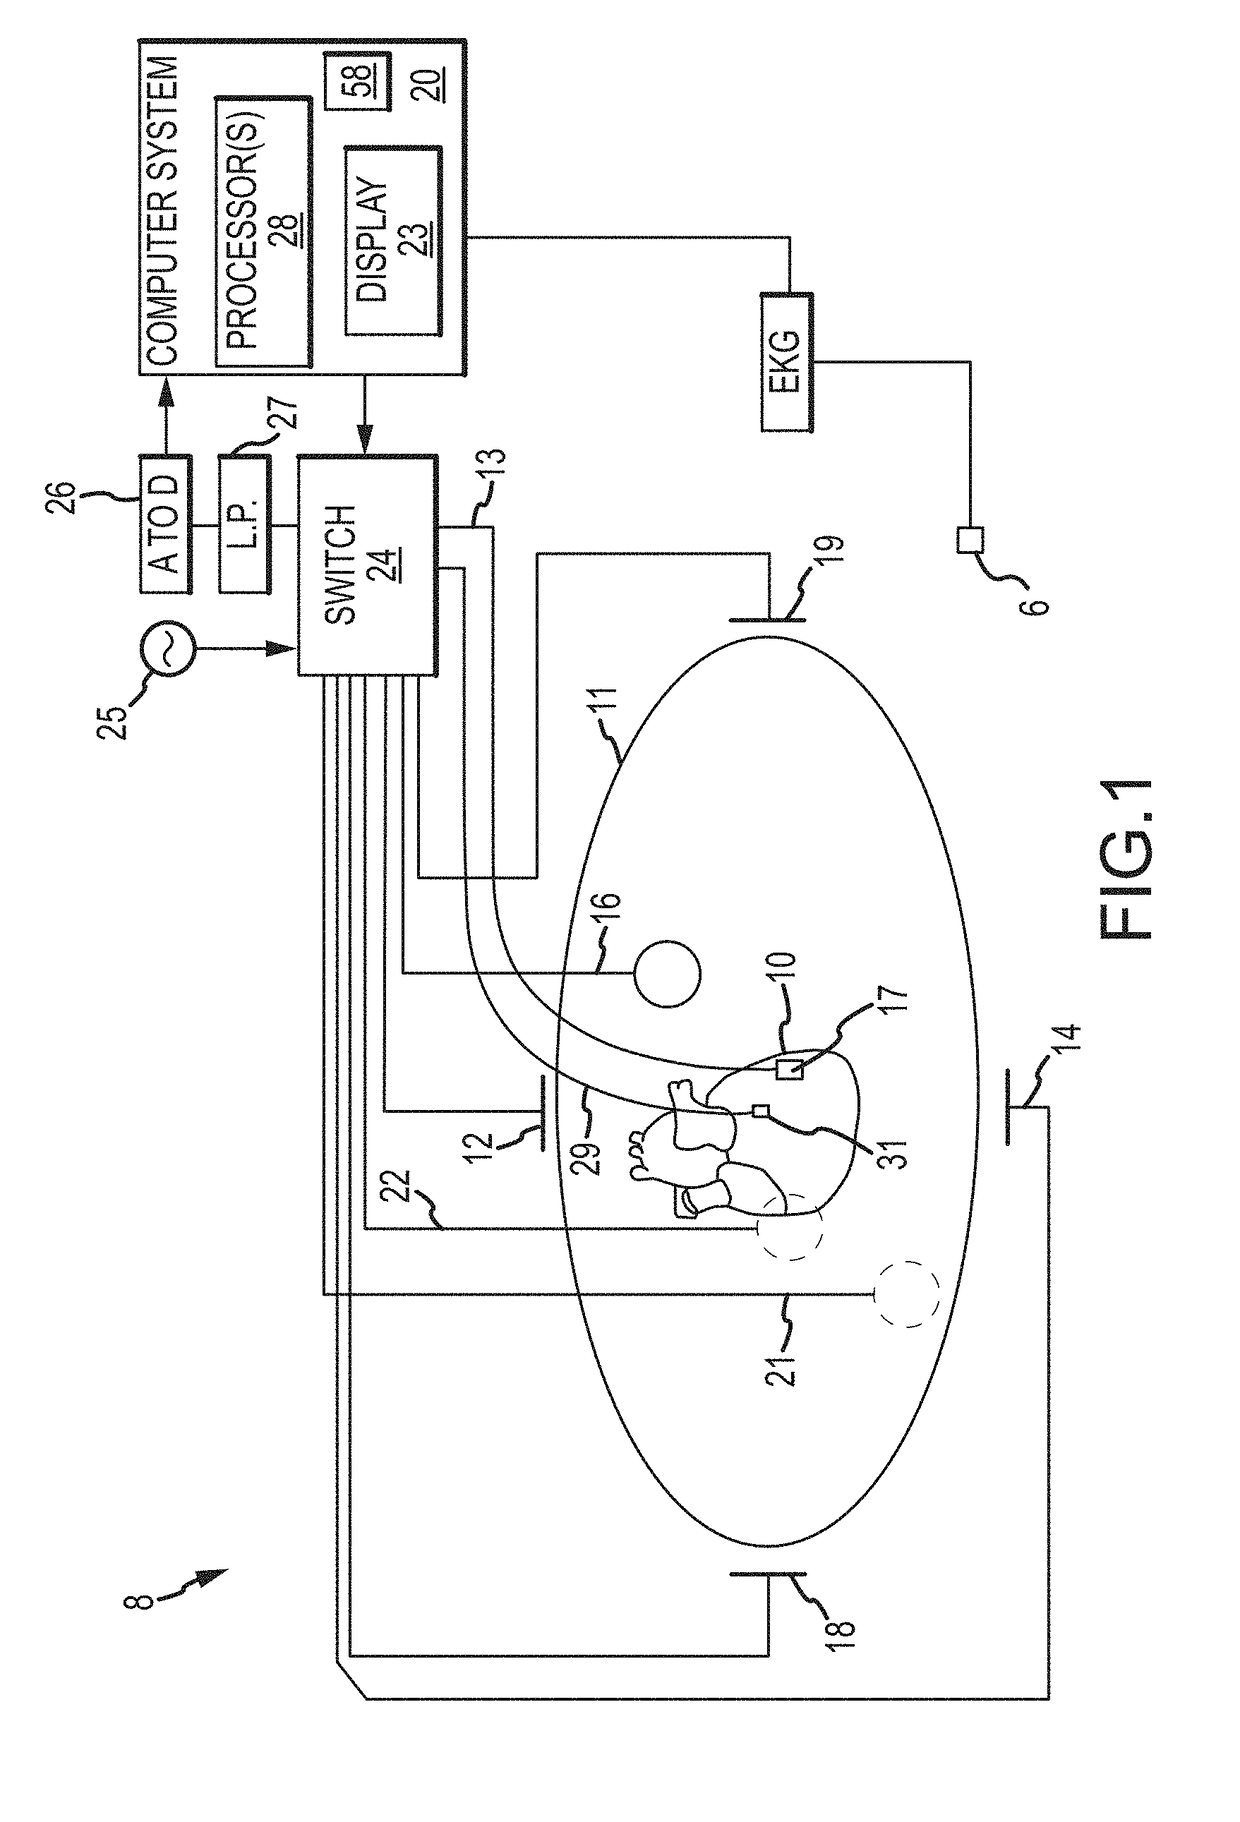 System and Method for Generating Premature Ventricular Contraction Electrophysiology Maps